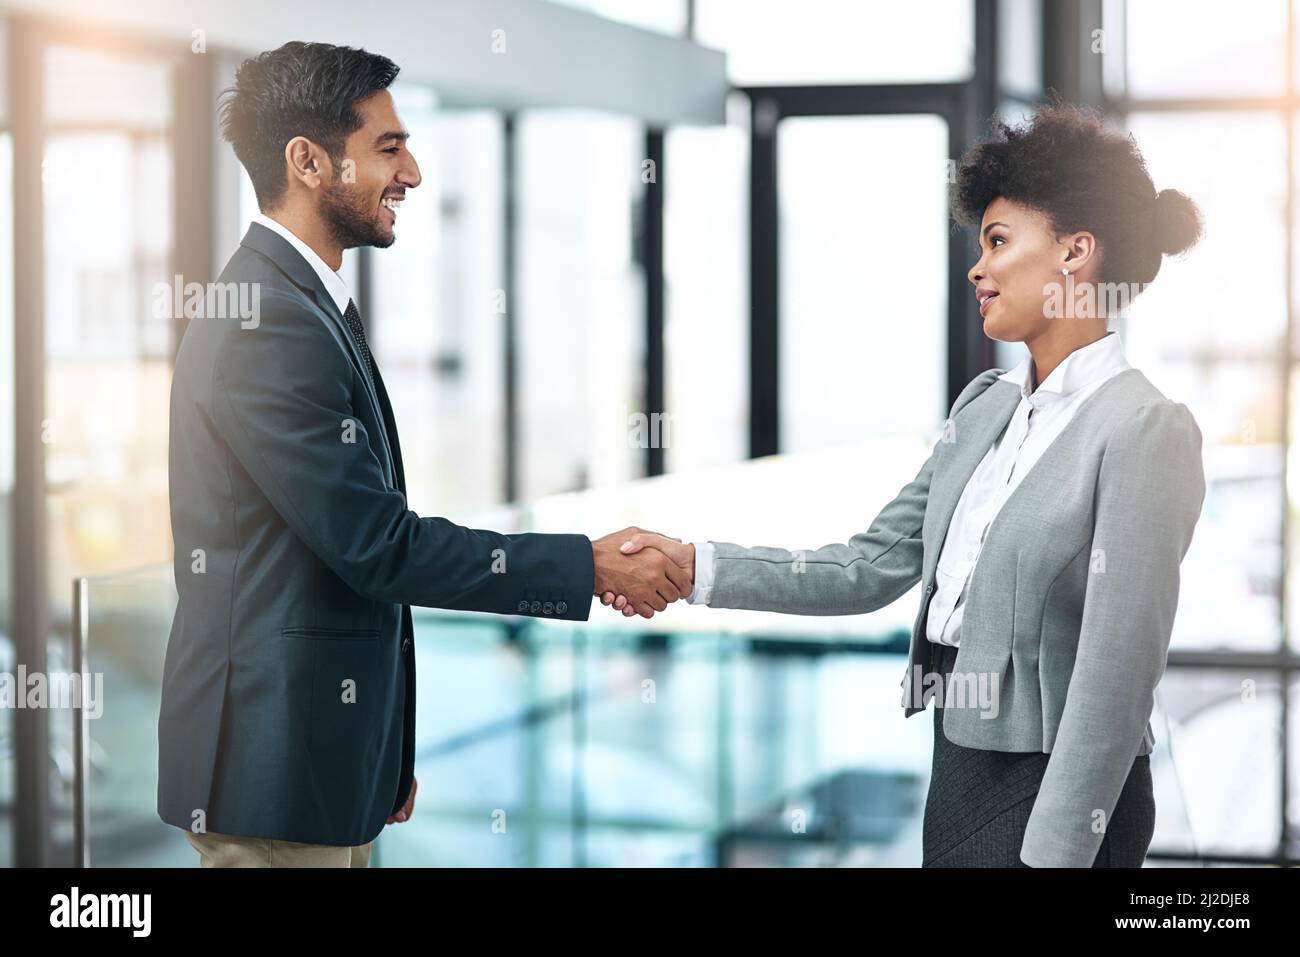 Offering a handshake with sincerity, confidence and authority. Shot of two businesspeople shaking hands. Stock Photo